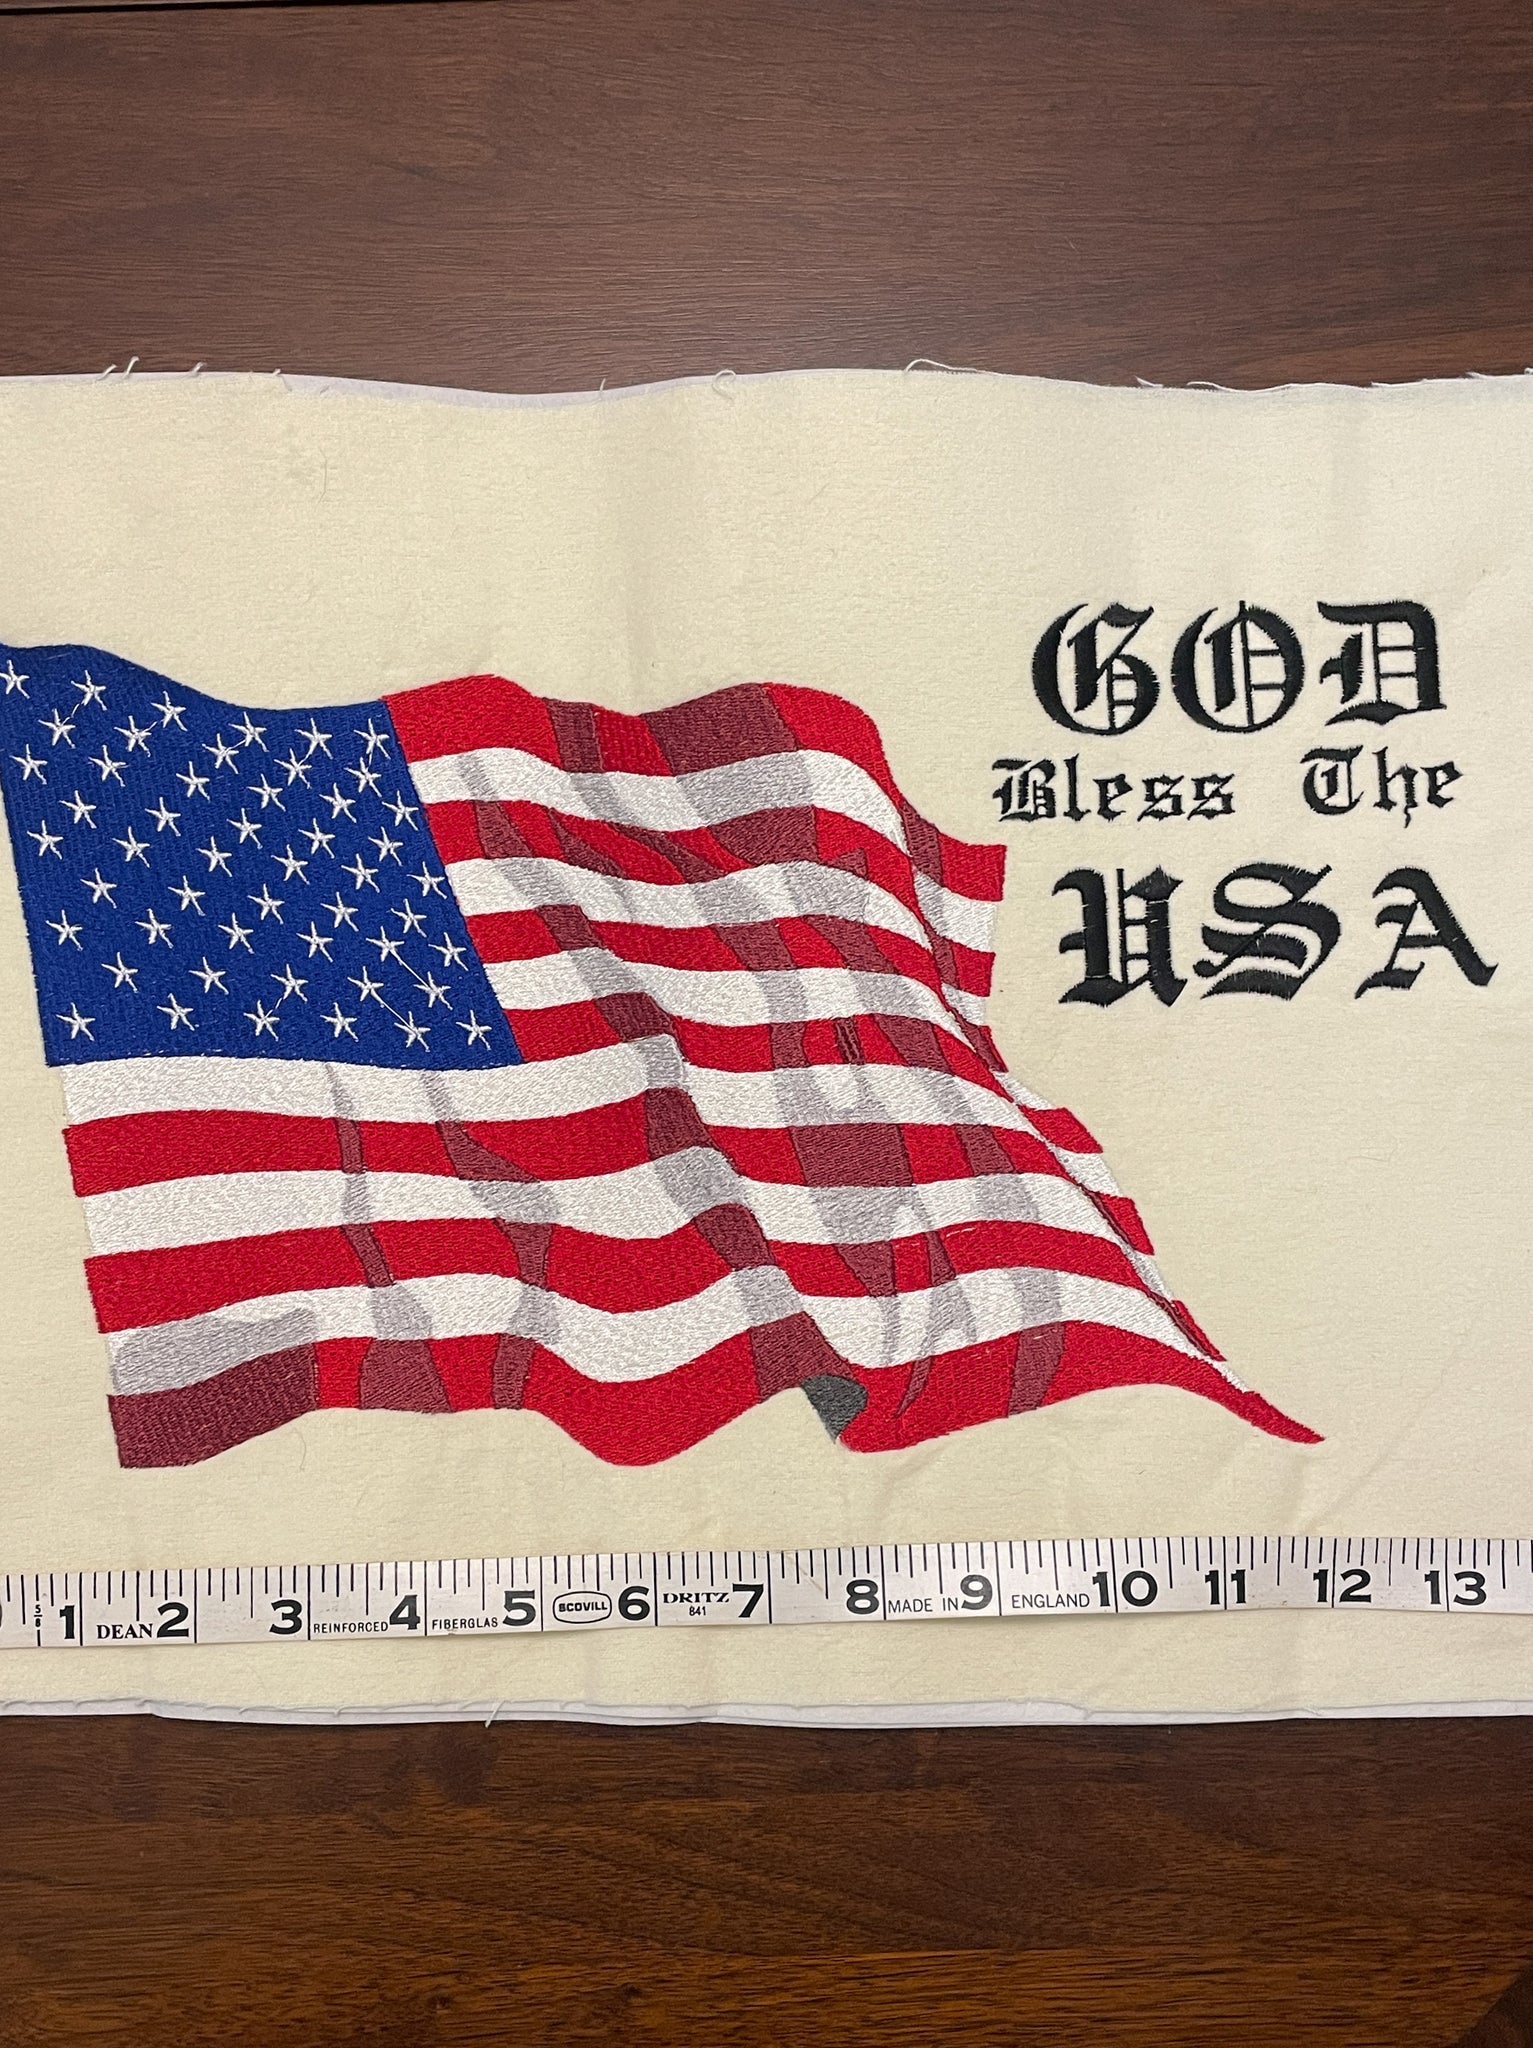 SALE Machine Embroidery Panel on Flannel - U.S.A. Flag on Cream Flannel